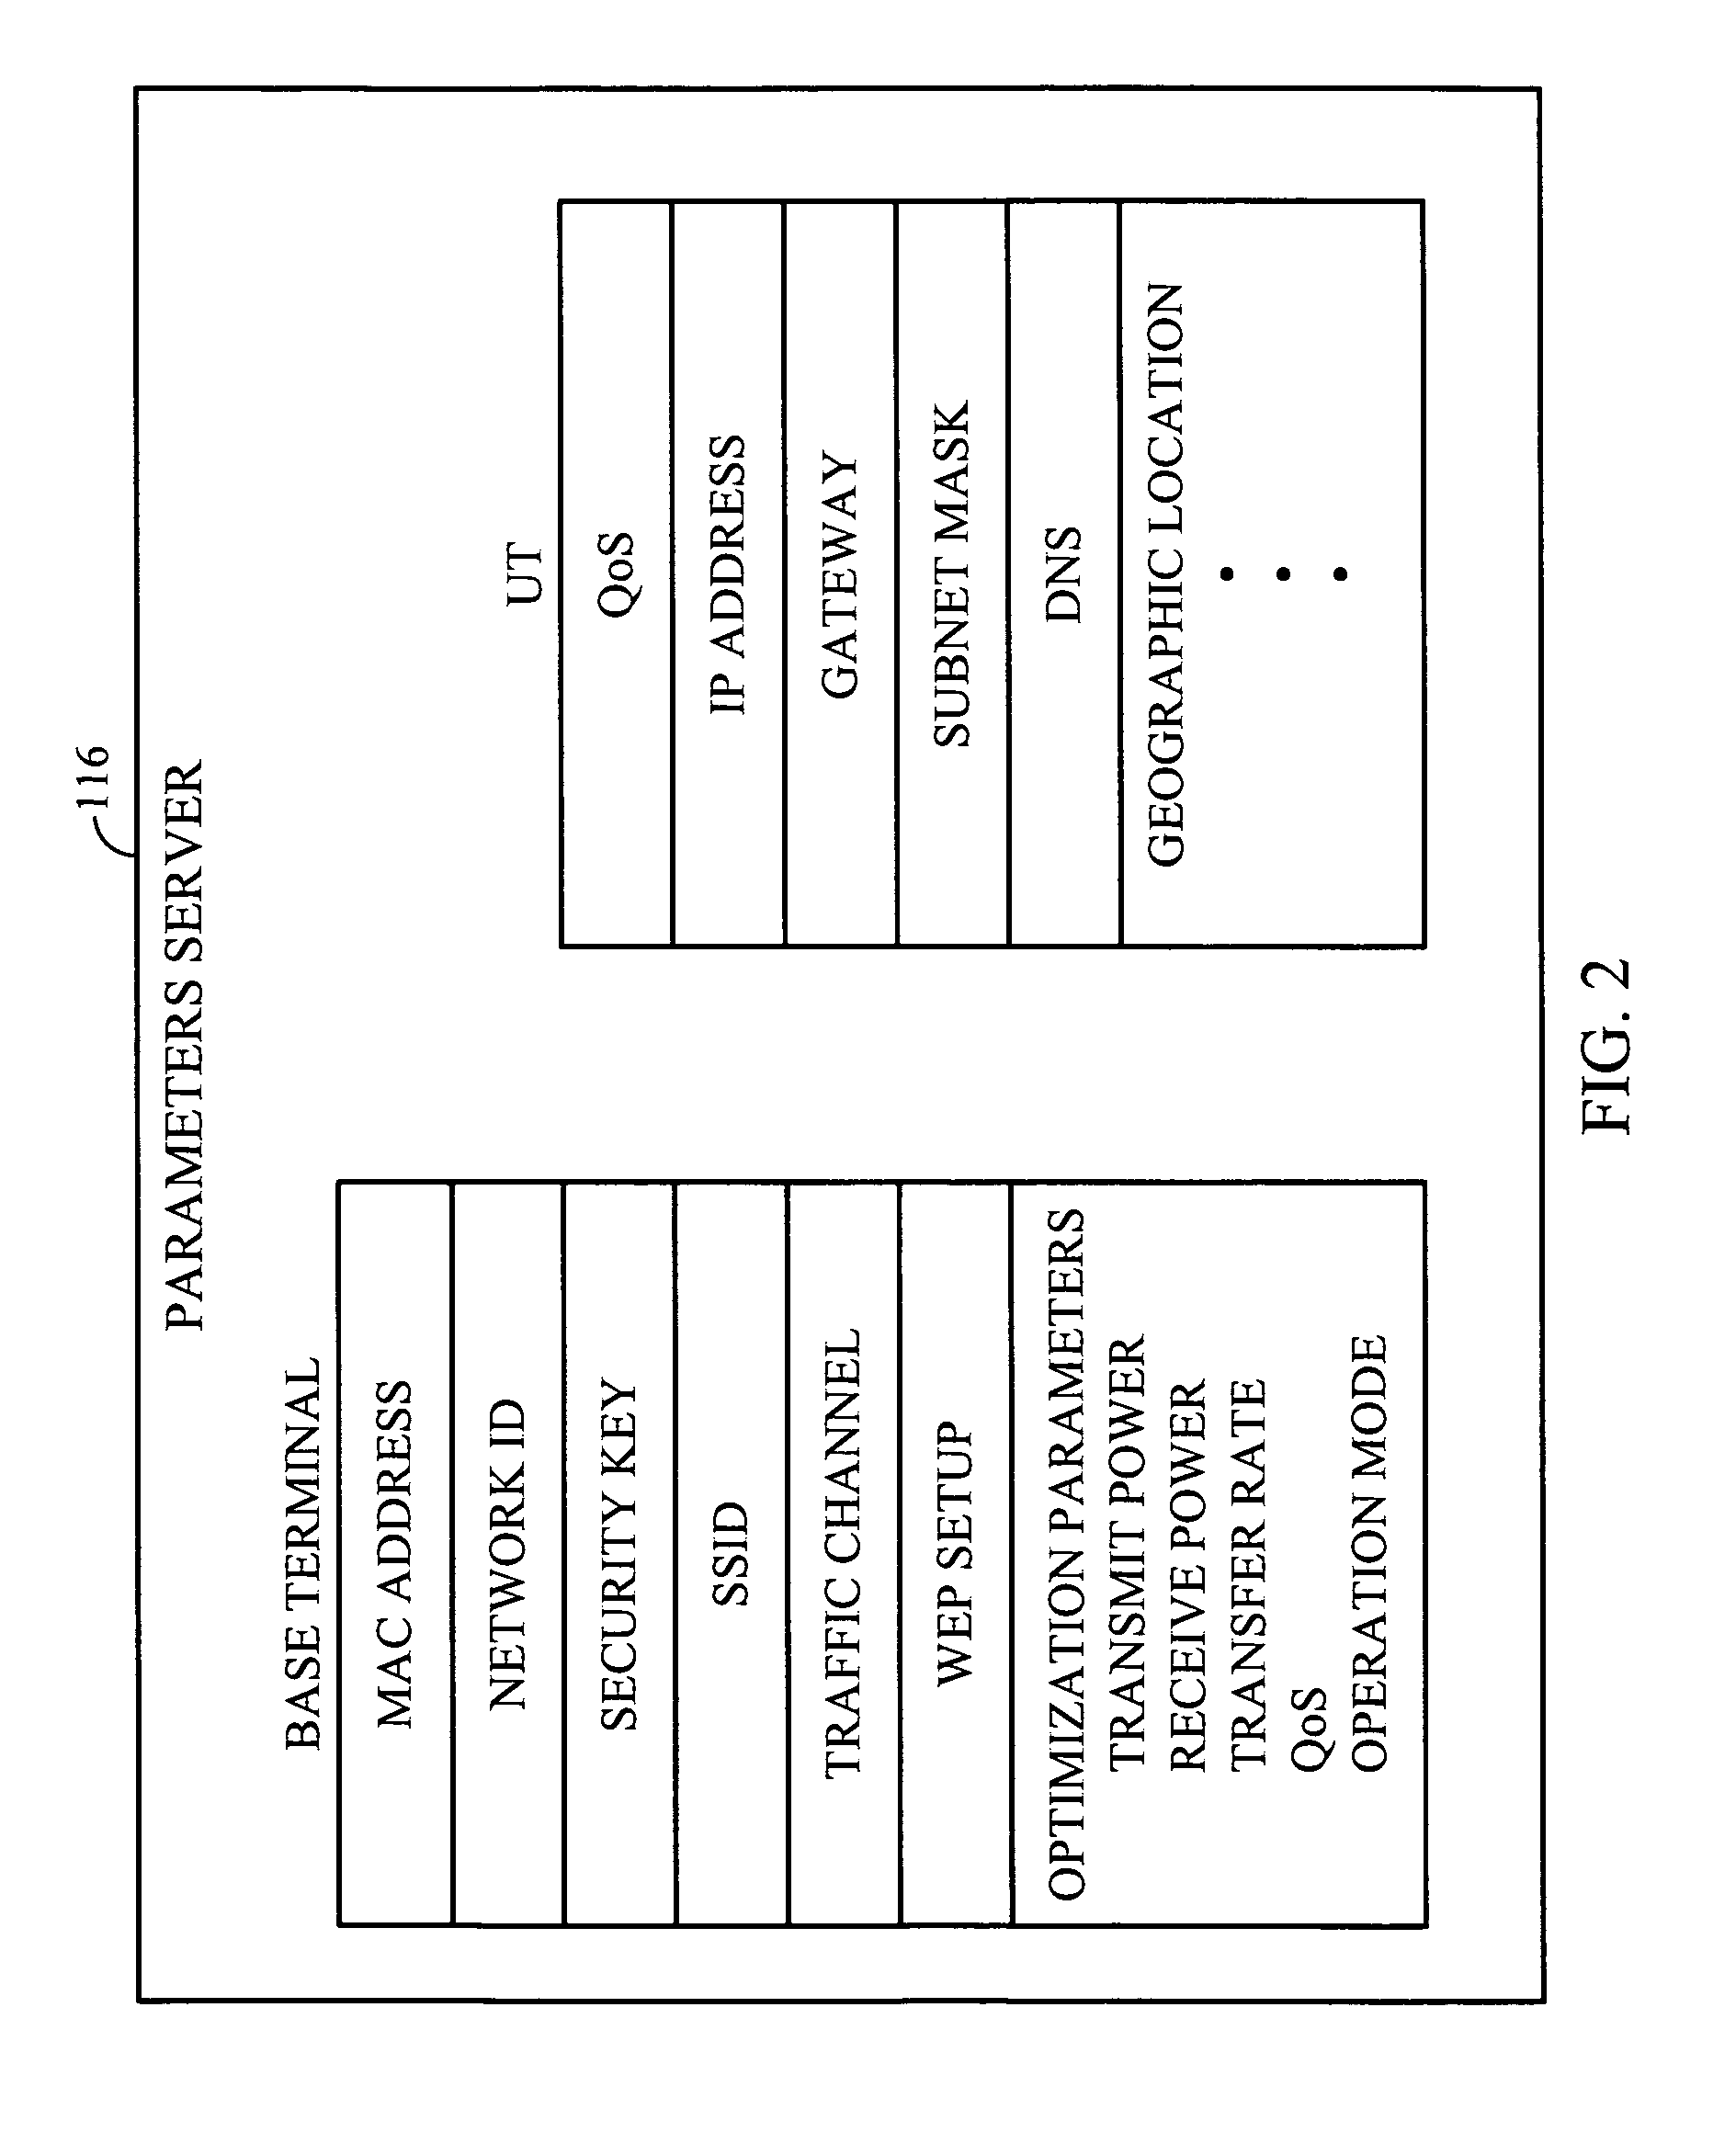 System and method for distributing wireless network access parameters